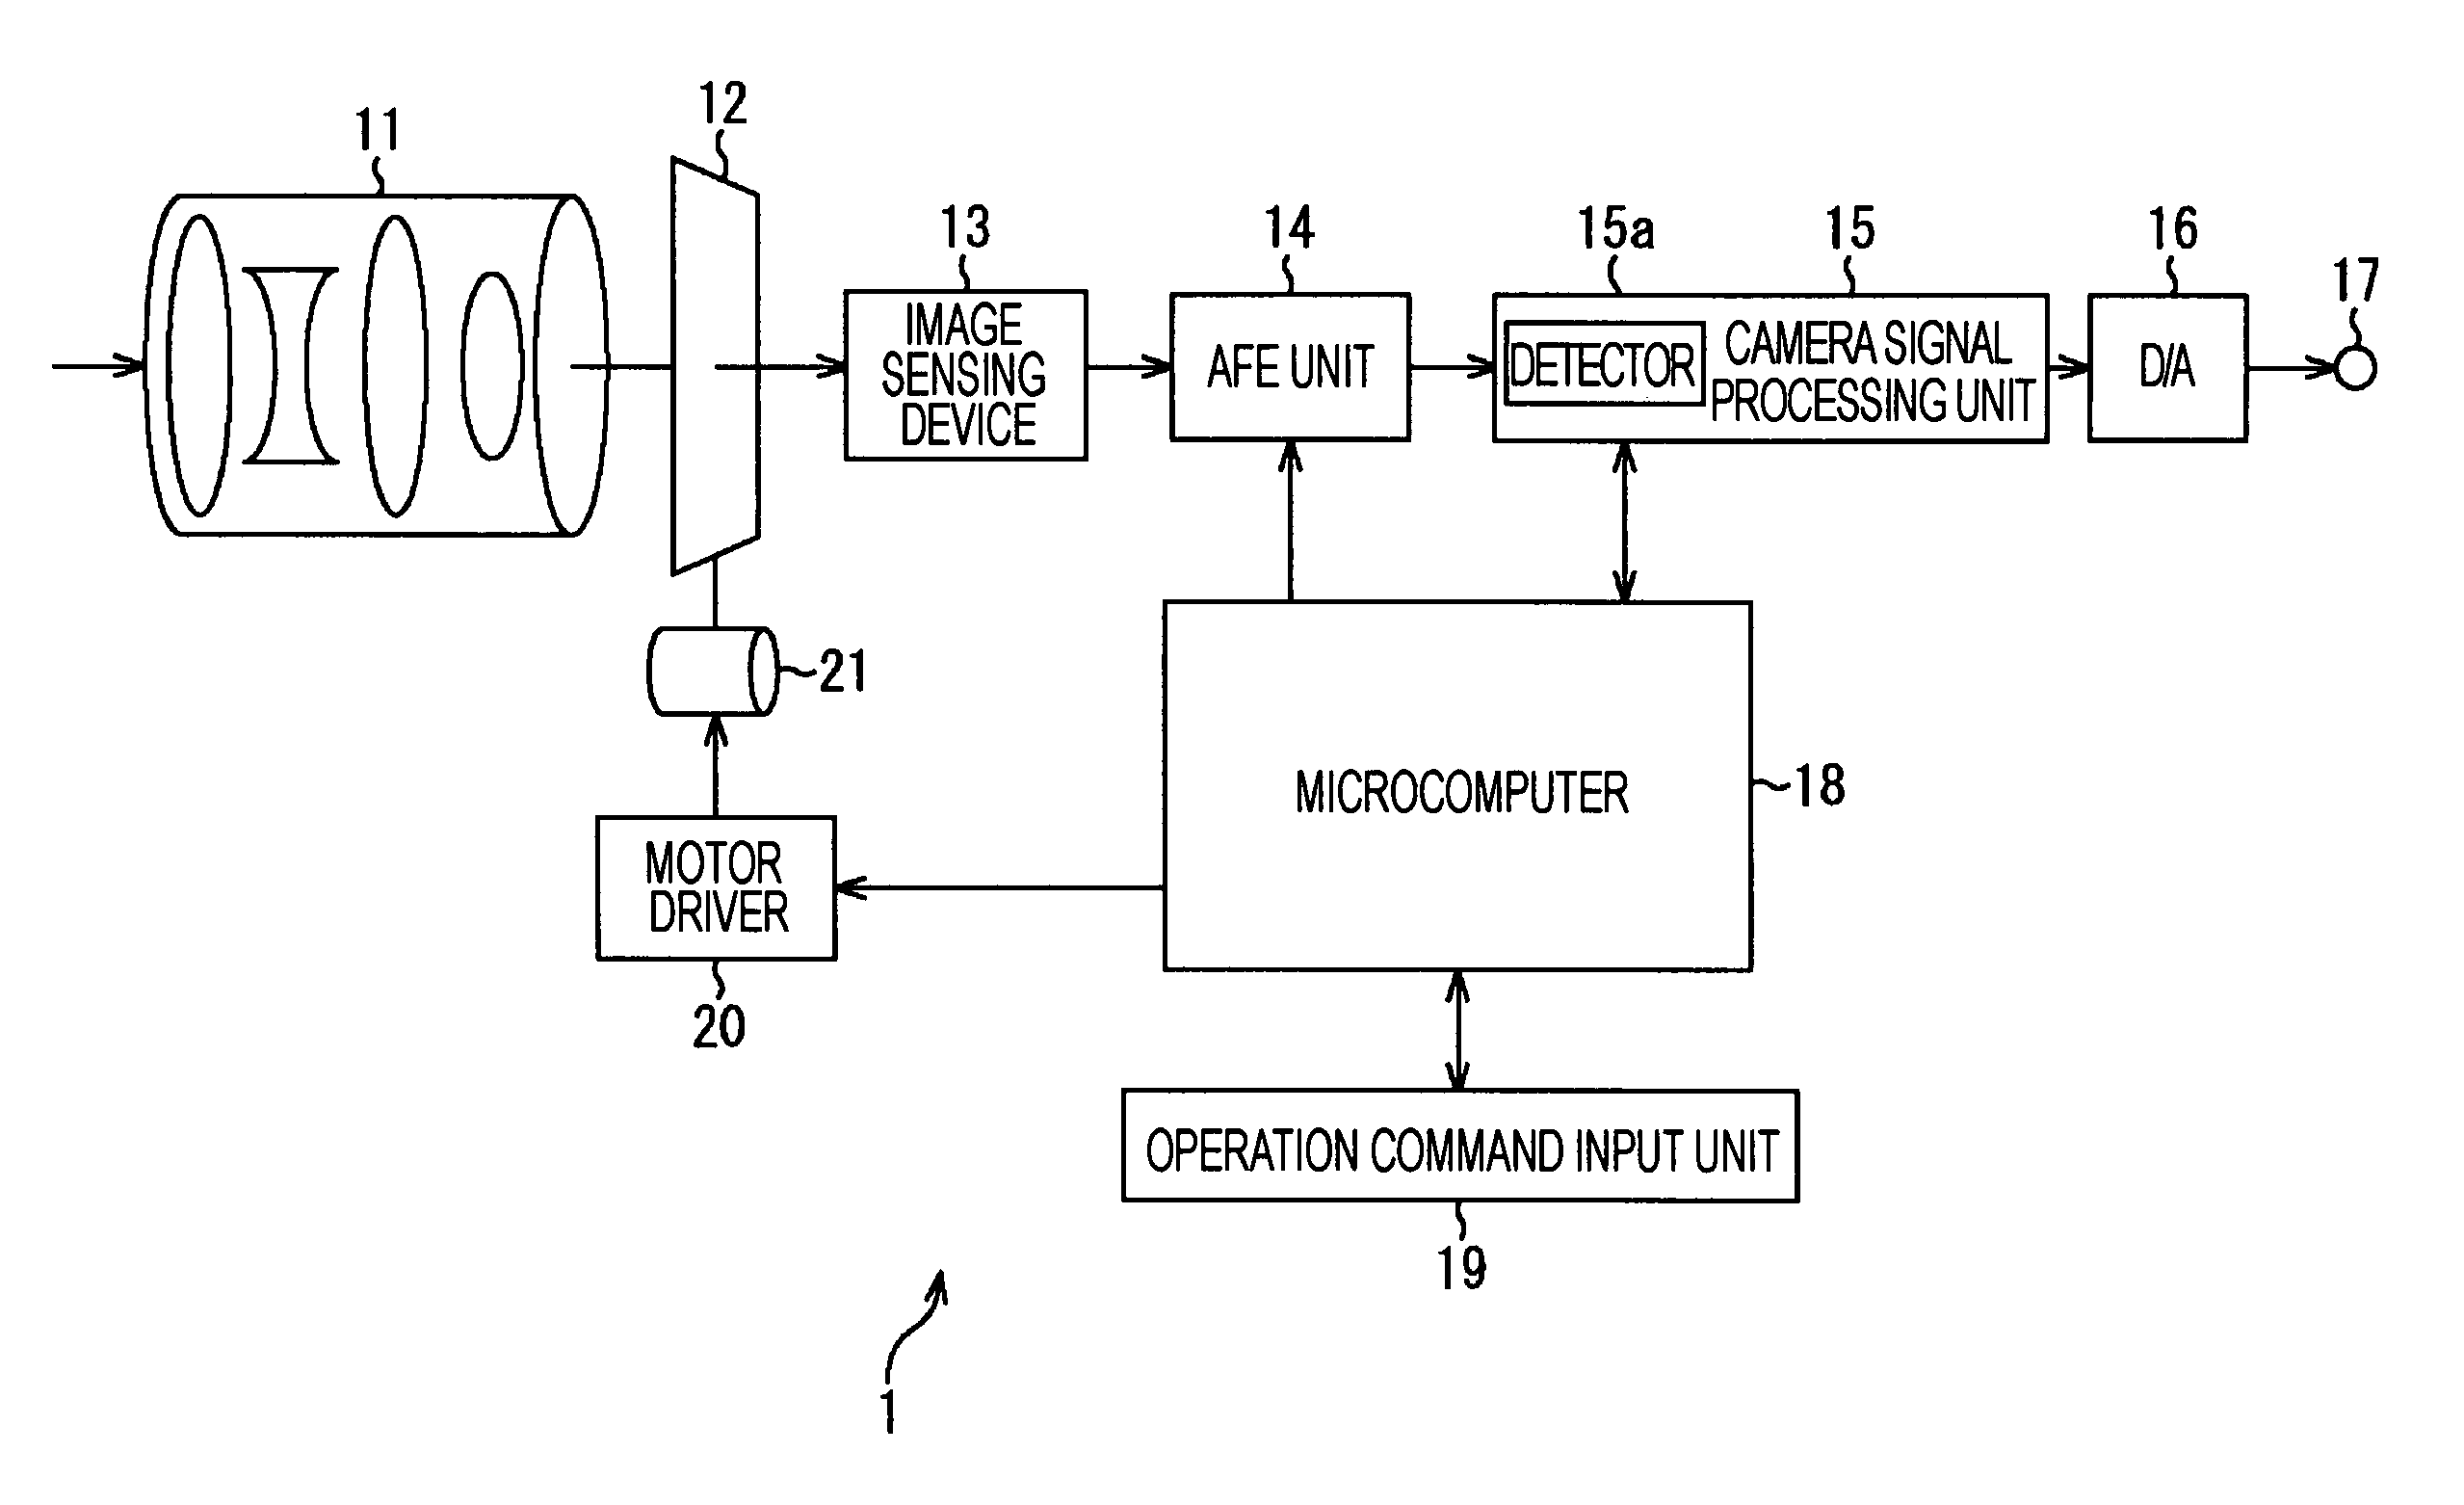 Imaging apparatus, and method and program for controlling an imaging apparatus